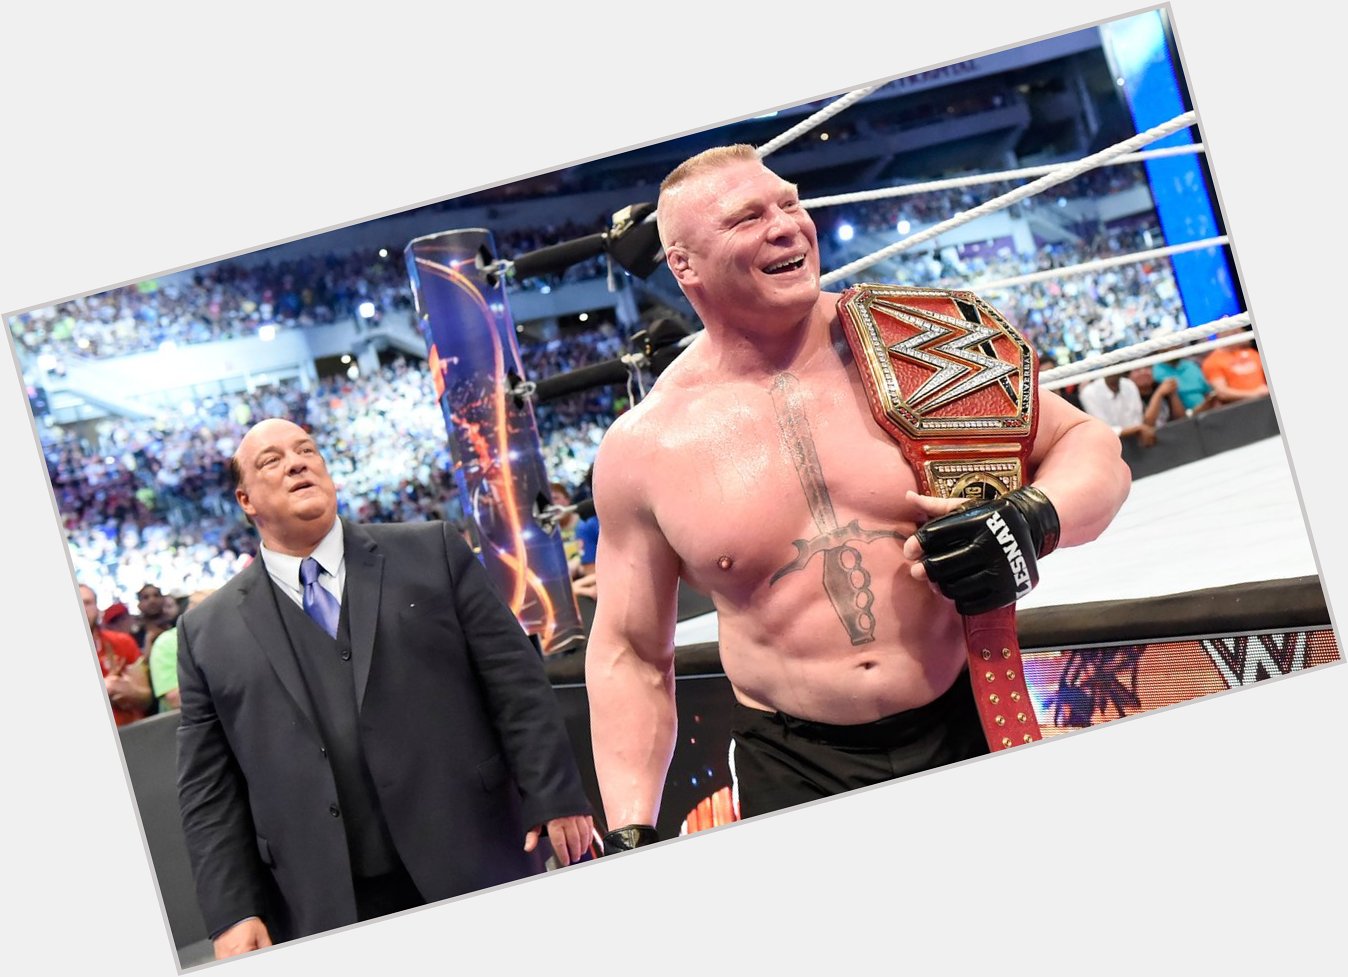 Happy Birthday to Brock Lesnar who turns 40 today! 